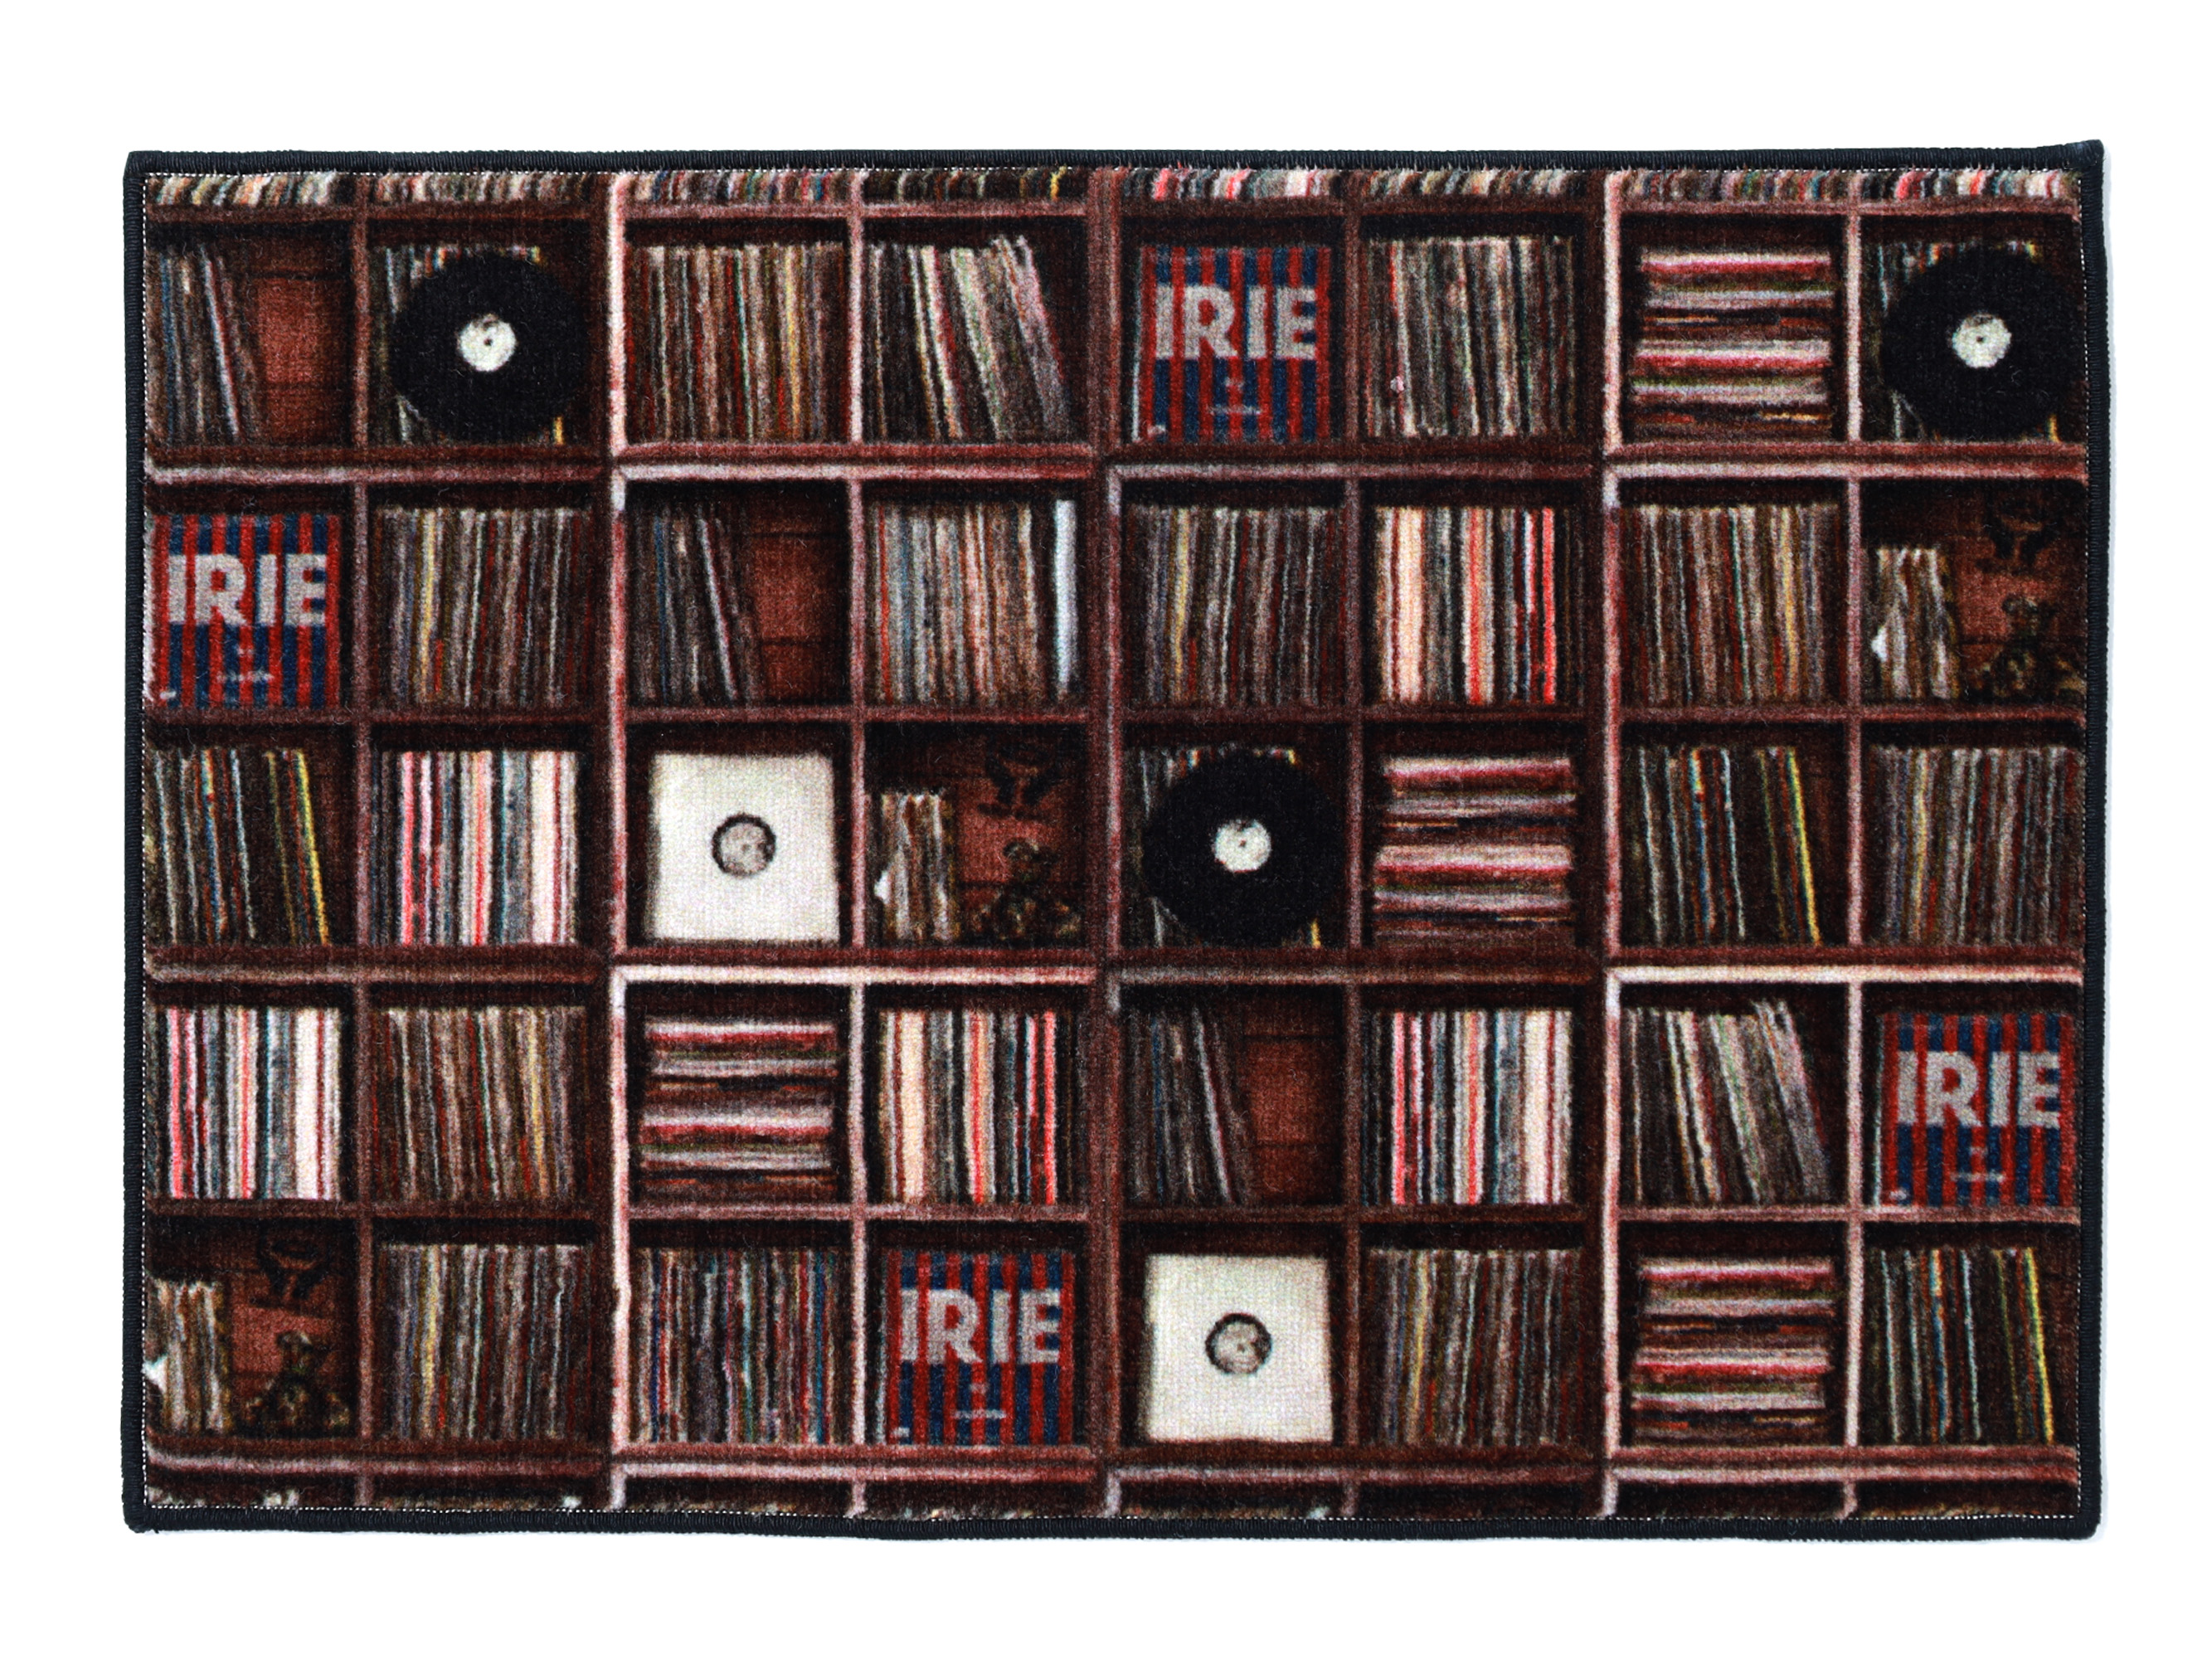 OLD RECORD BOX MAT - IRIE by irielife